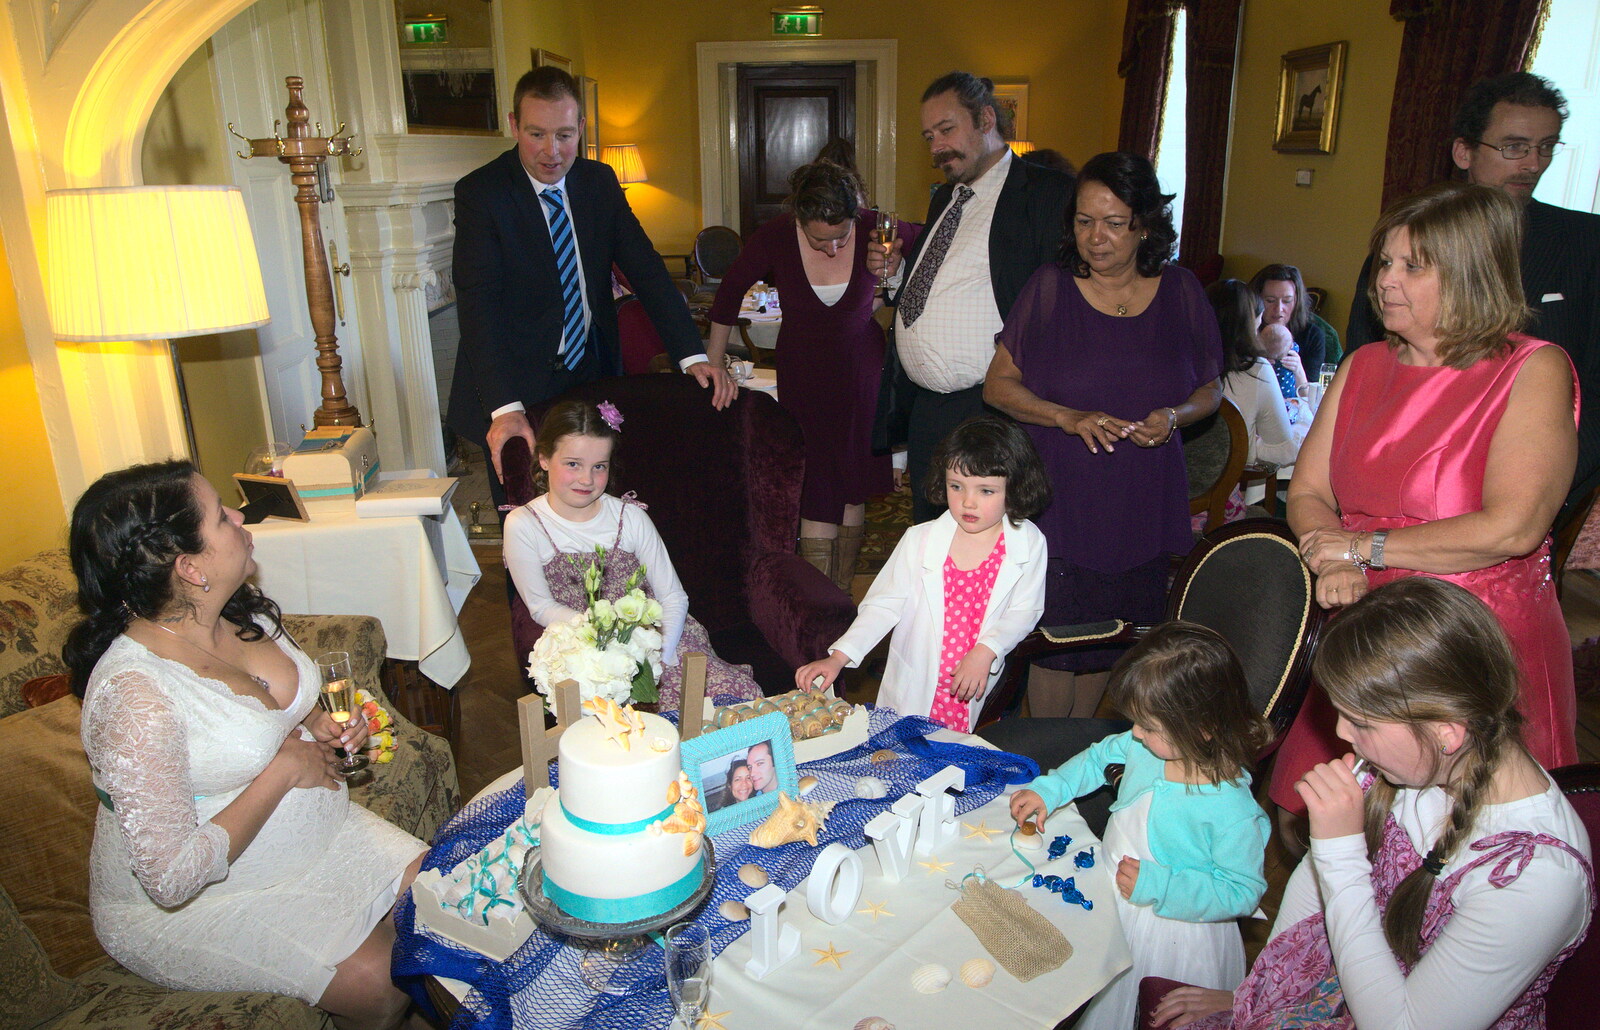 It's all go around the cake from James and Haryanna's Wedding, Grand Canal Dock, Dublin - 15th April 2015